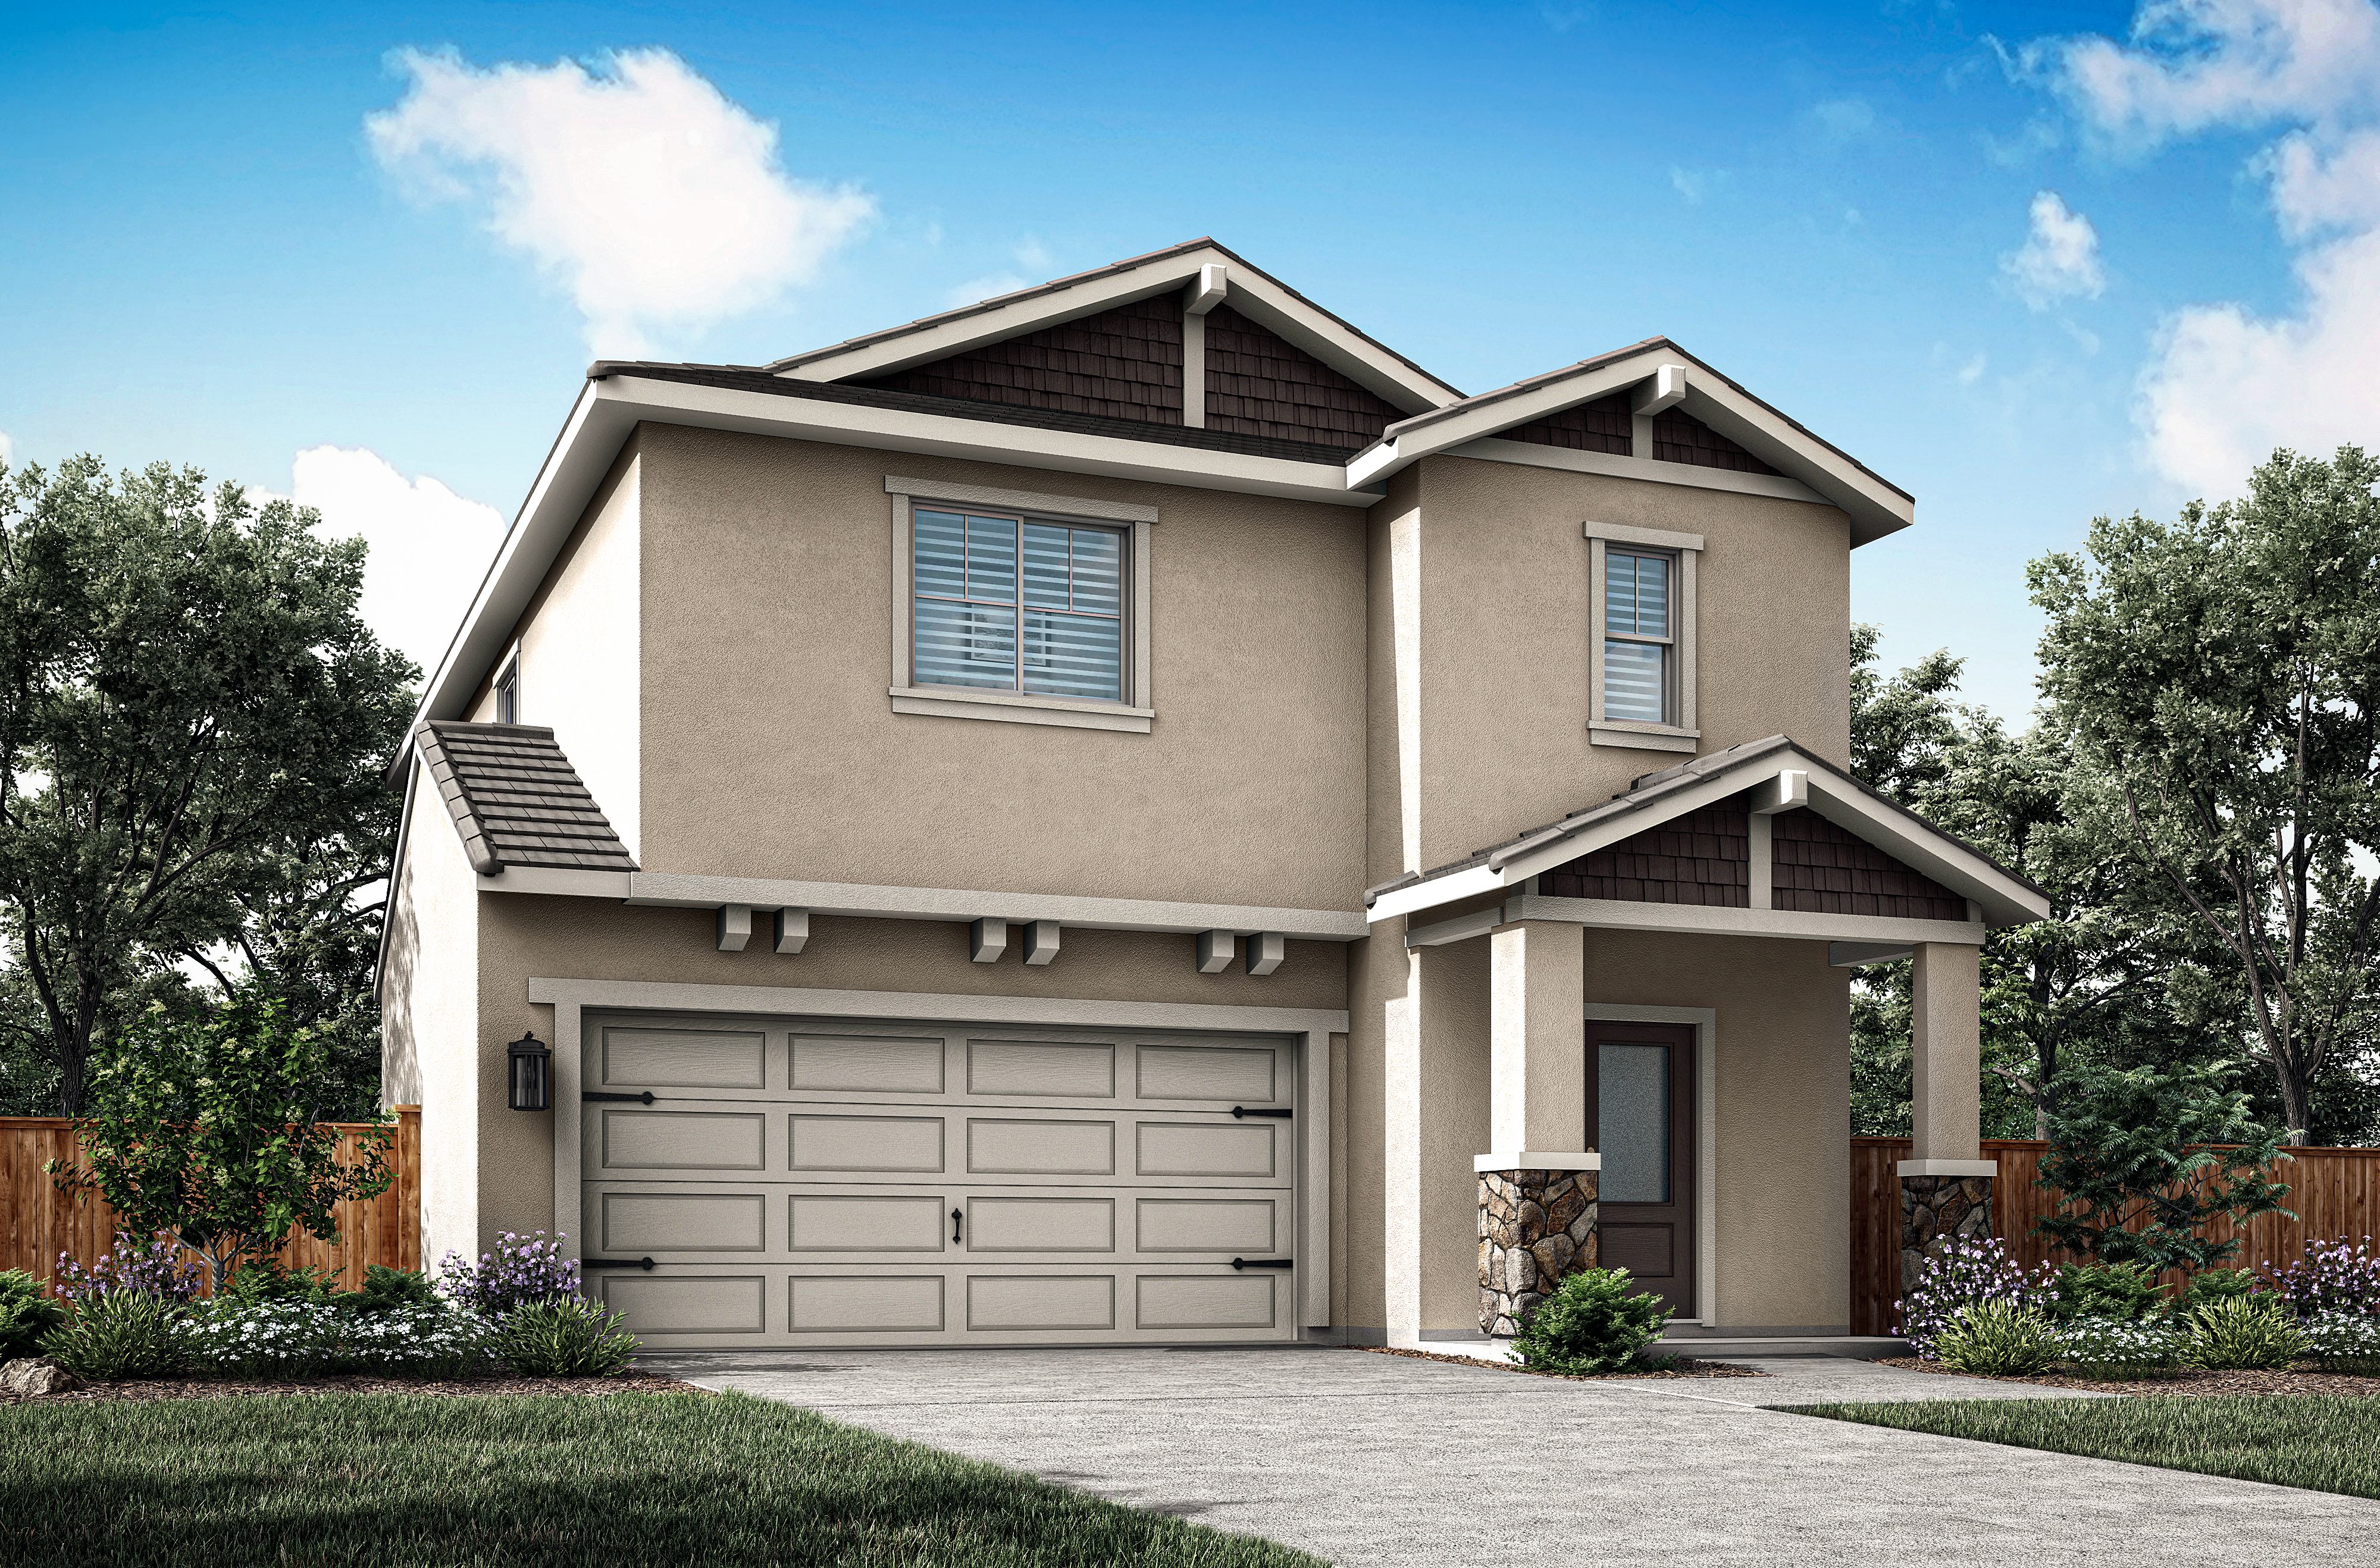 LGI Homes announces the grand opening of Velare at Twelve Bridges in Lincoln, a community of new, move-in ready homes with designer upgrades included.